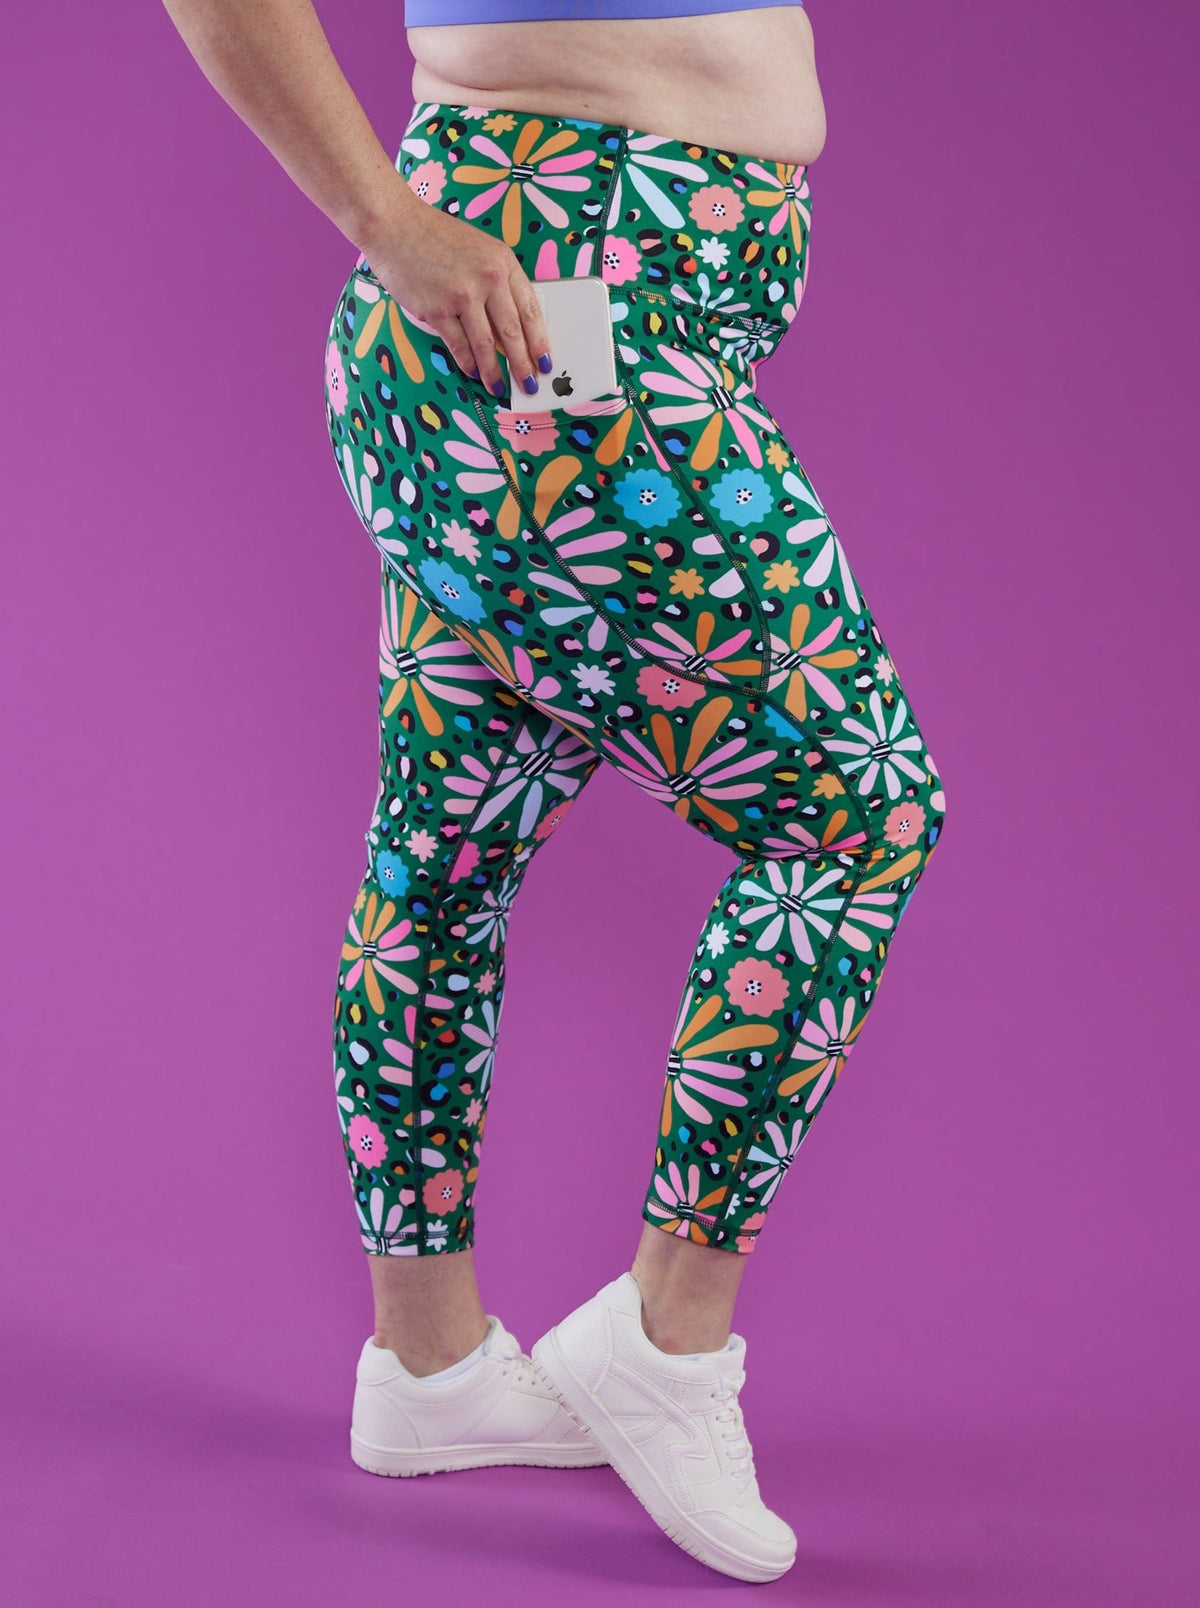 Wild Flower Everyday Legging - 7/8 length - high waisted leggings with tummy control and phone pocket